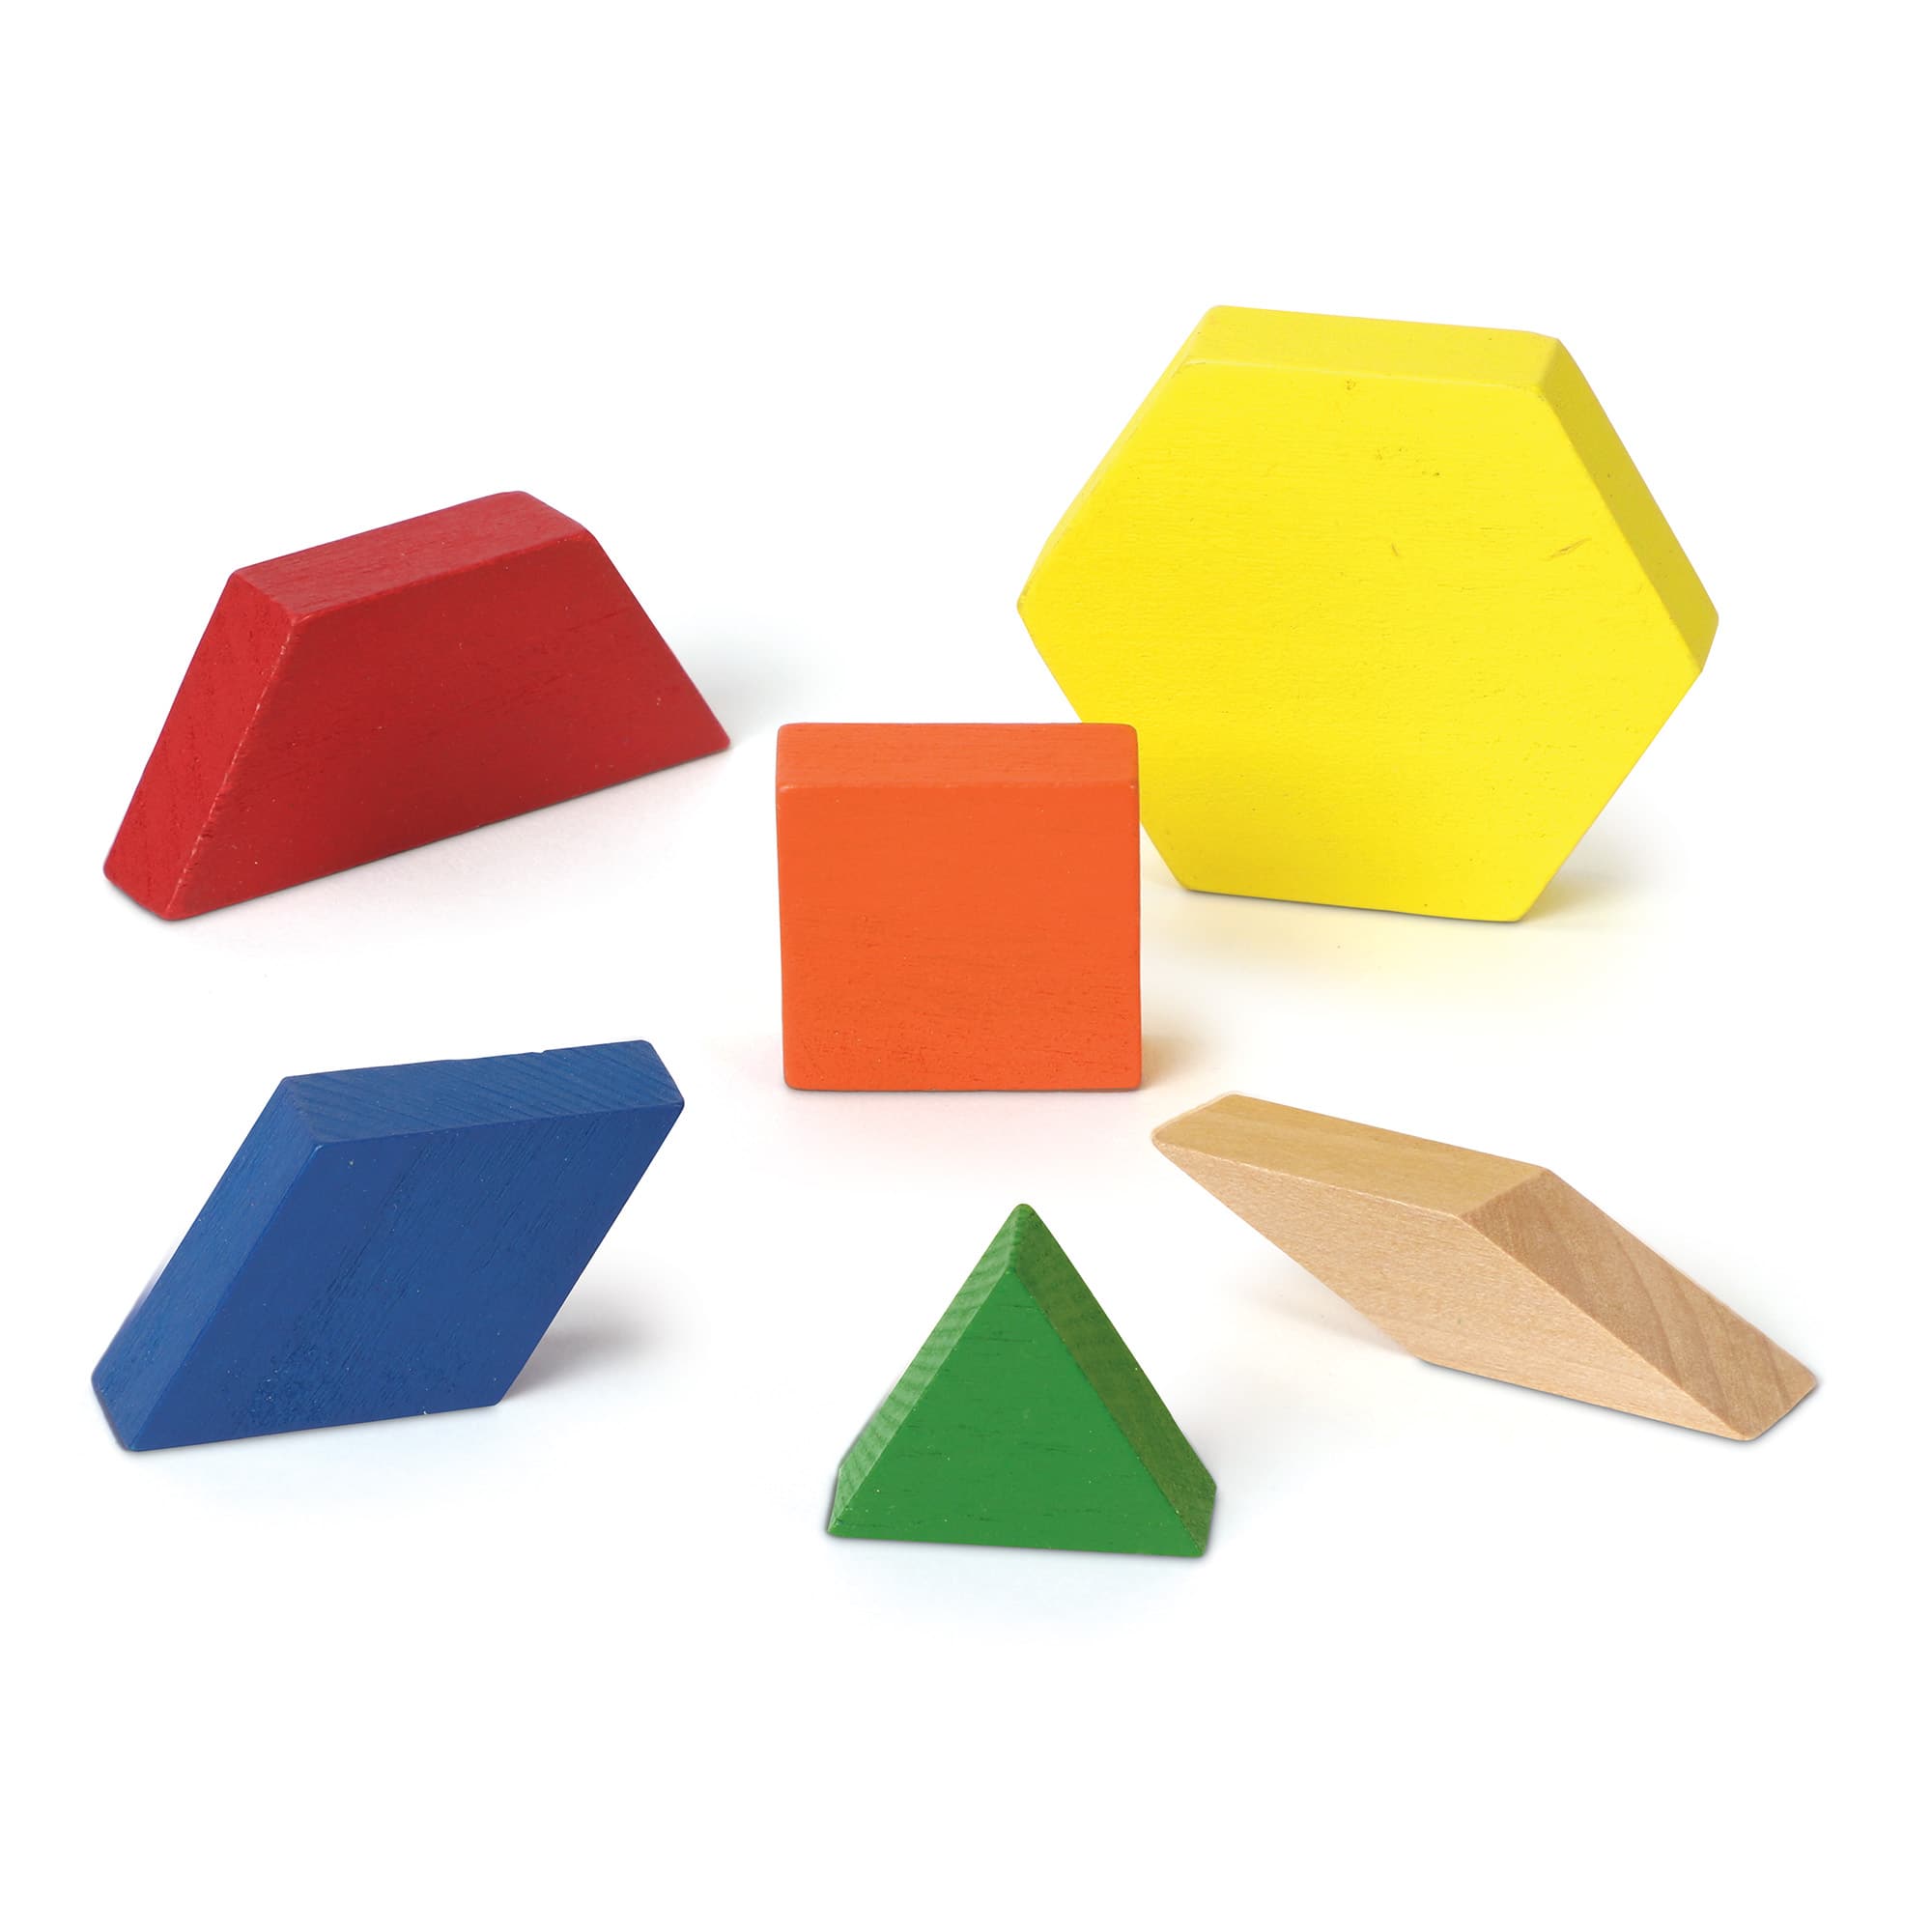 Learning　250ct.　Wooden　Blocks,　Resources　Michaels　1cm　Pattern